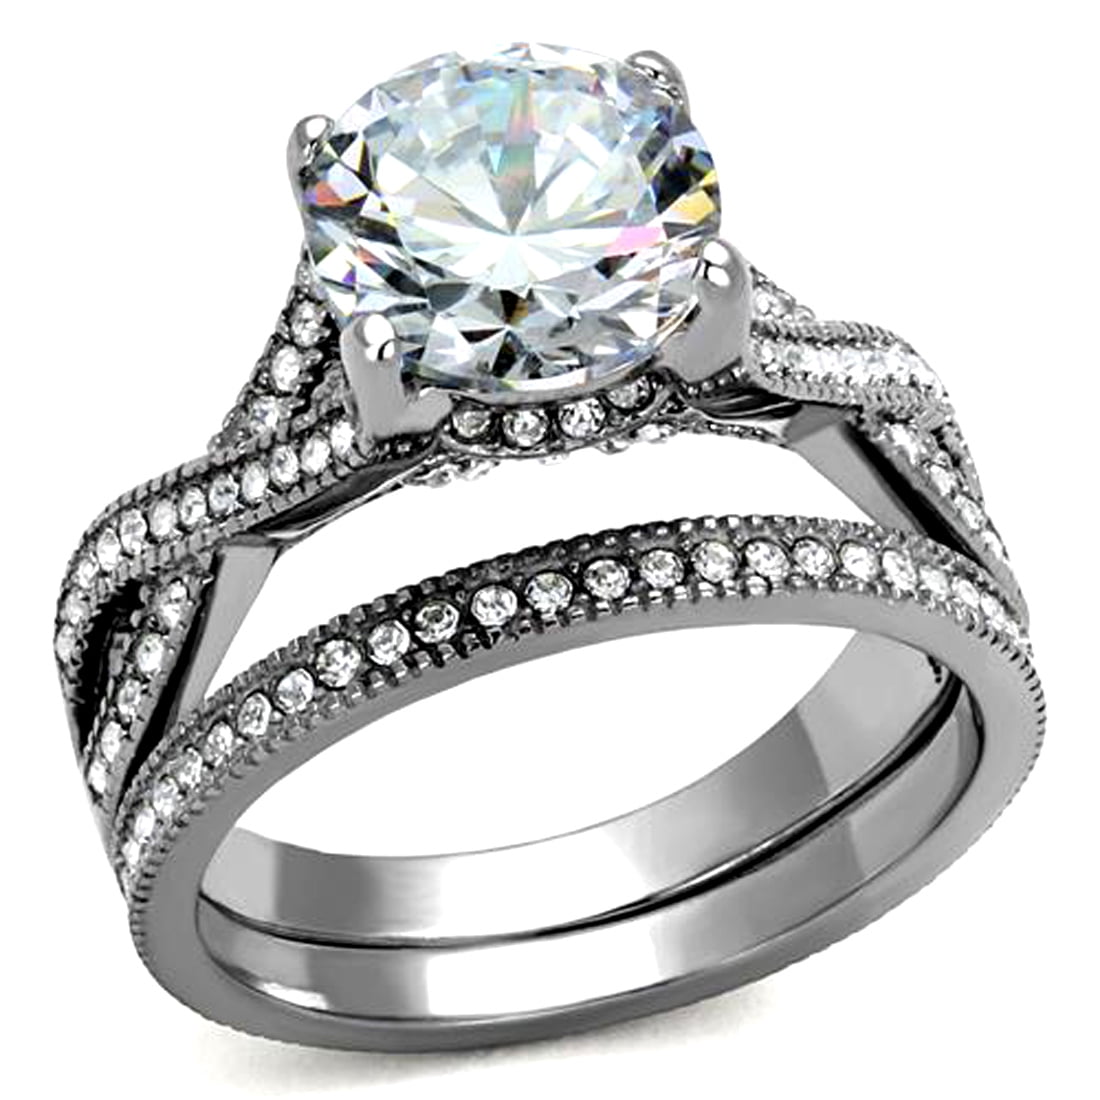 Round White Cubic Zirconia 4-Prong Set Solitaire Stainless Steel Ring Ladies 